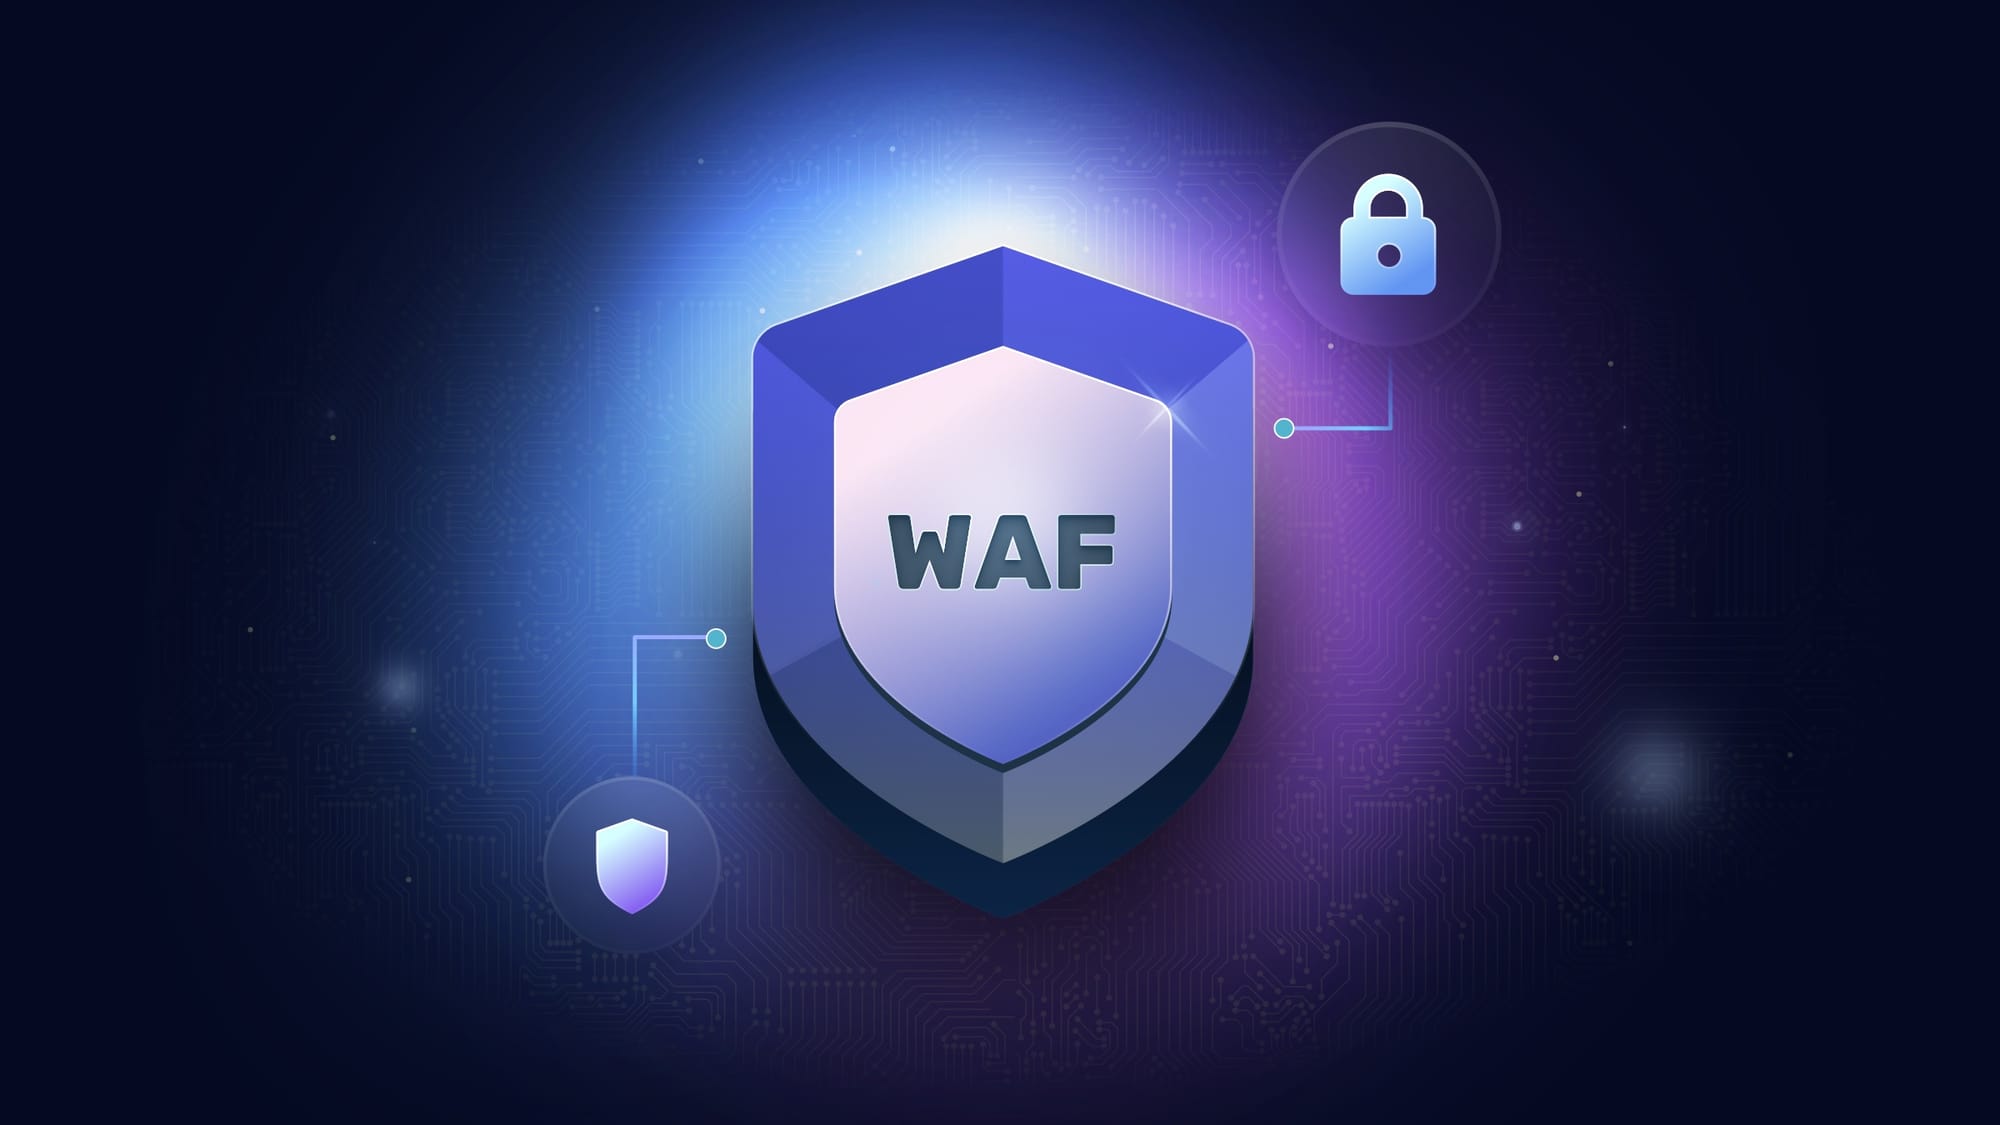 Why does WAF matter in API security